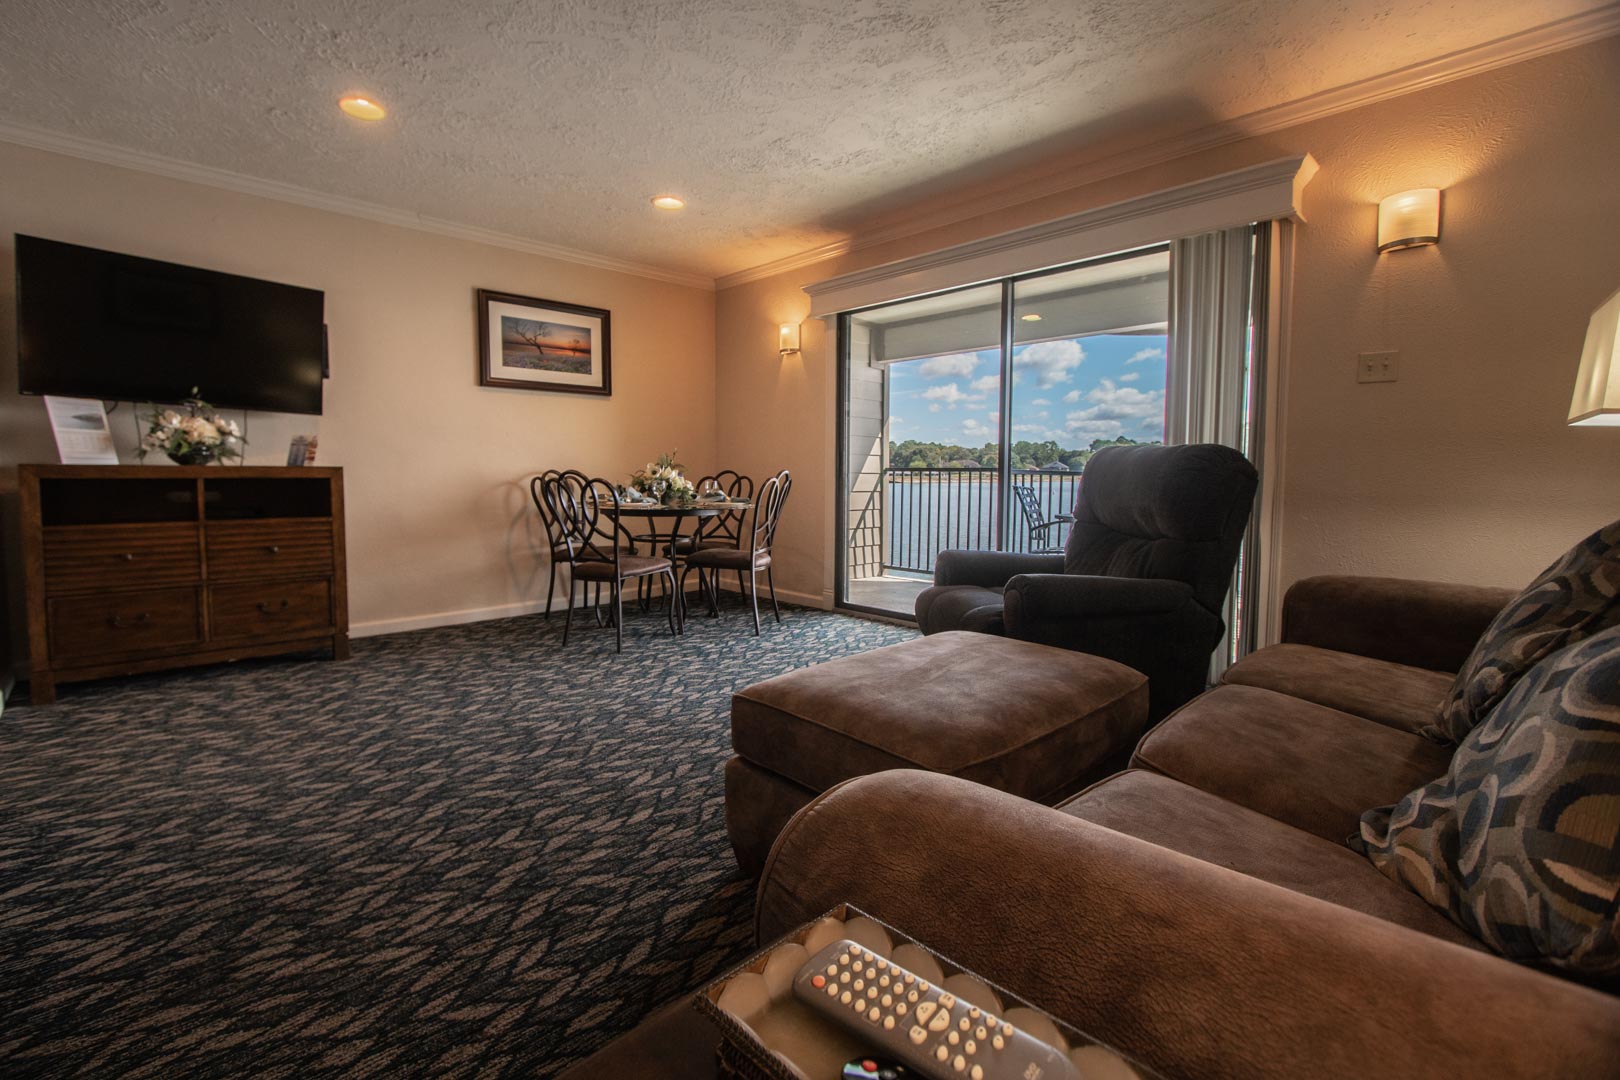 A spacious living room area with access to the balcony at VRI's The Landing at Seven Coves in Willis, Texas.